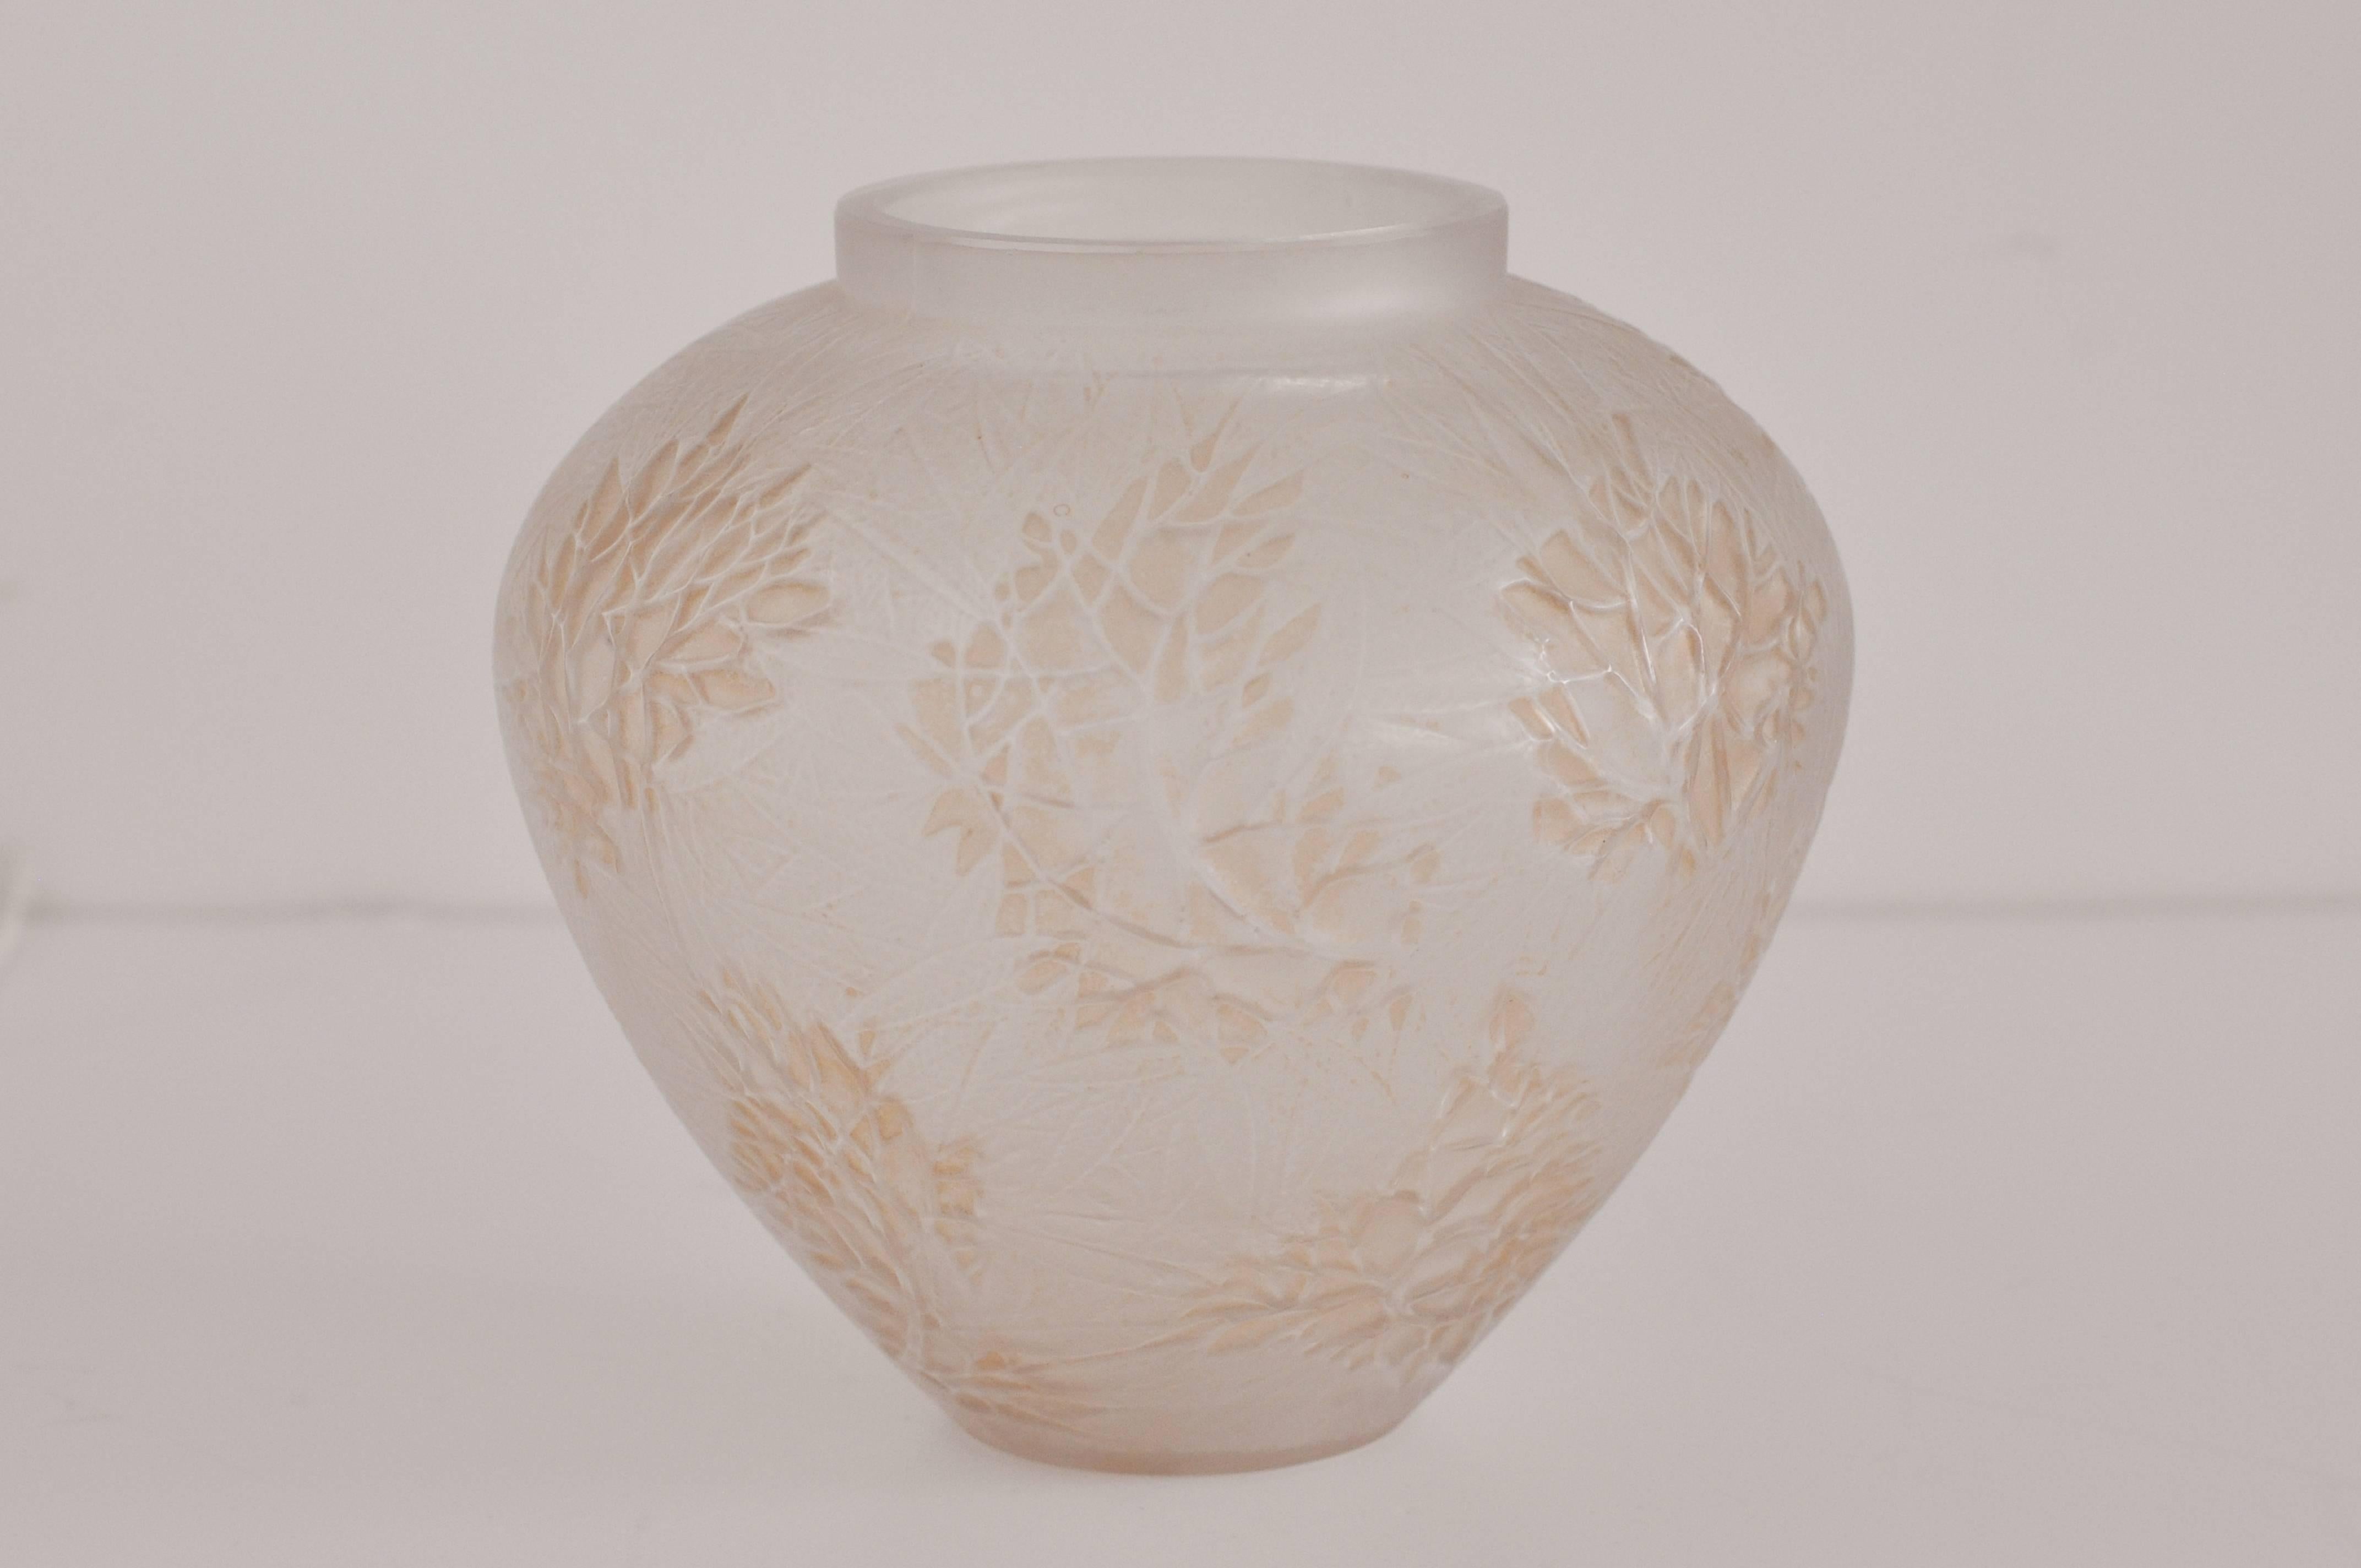 R. Lalique "Esterel" vase, bulbous shape in frosted glass with a stylized floral and leaf pattern.